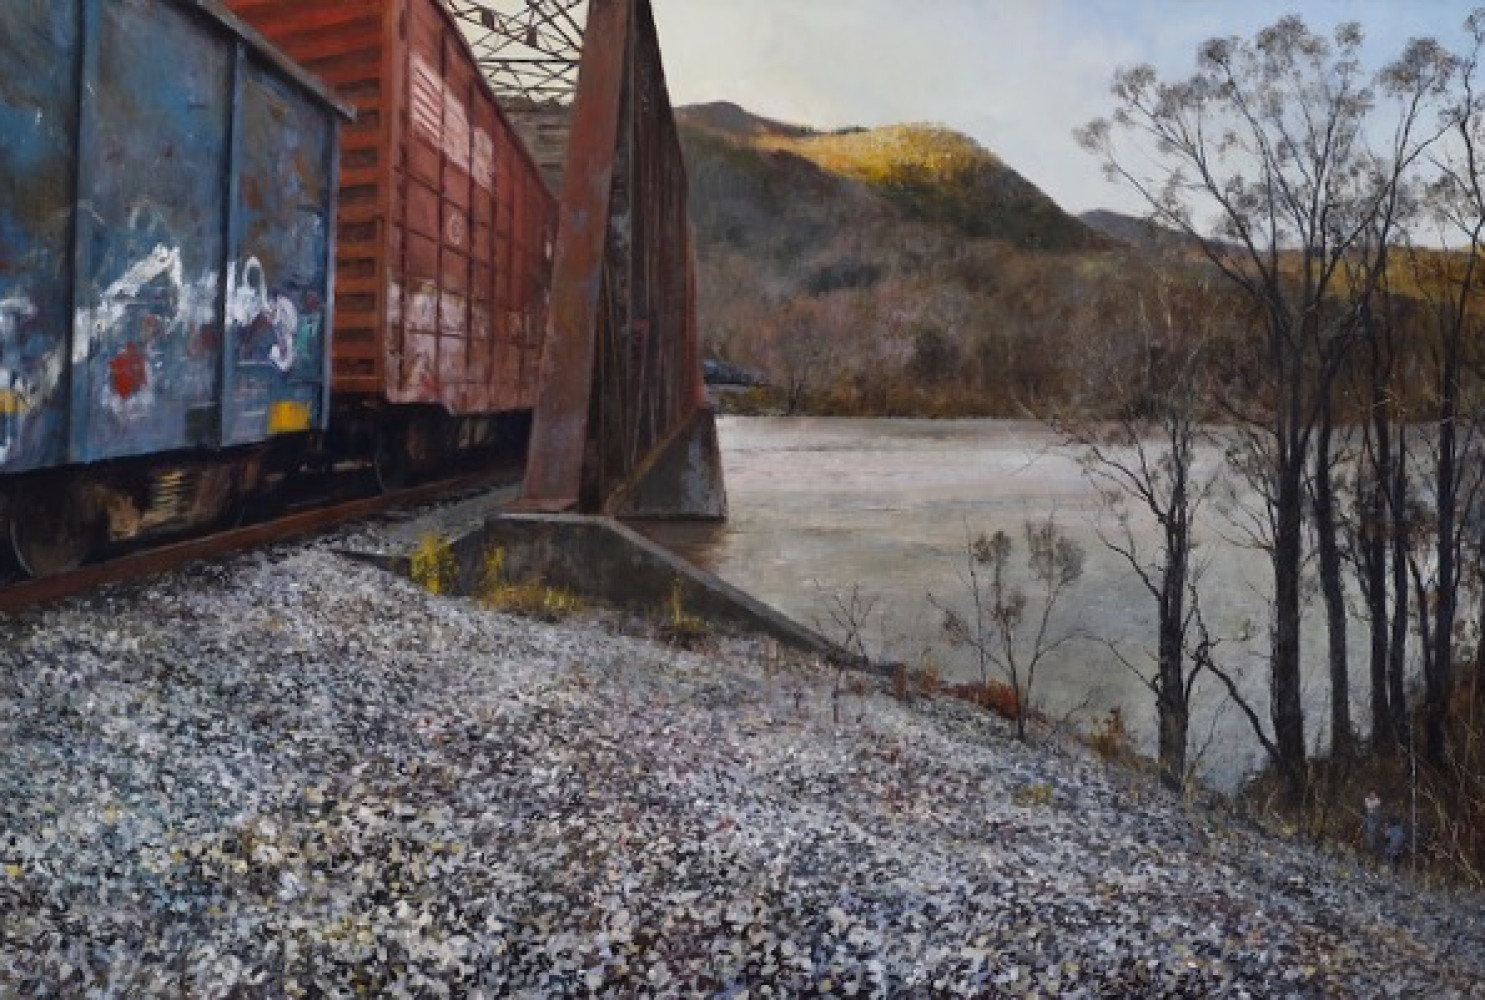 Where the sun refuse to shine’ (Some dark Holler), 2012, by Julyan Davis; Oil on canvas; 40×64 inches; Courtesy of the artist.